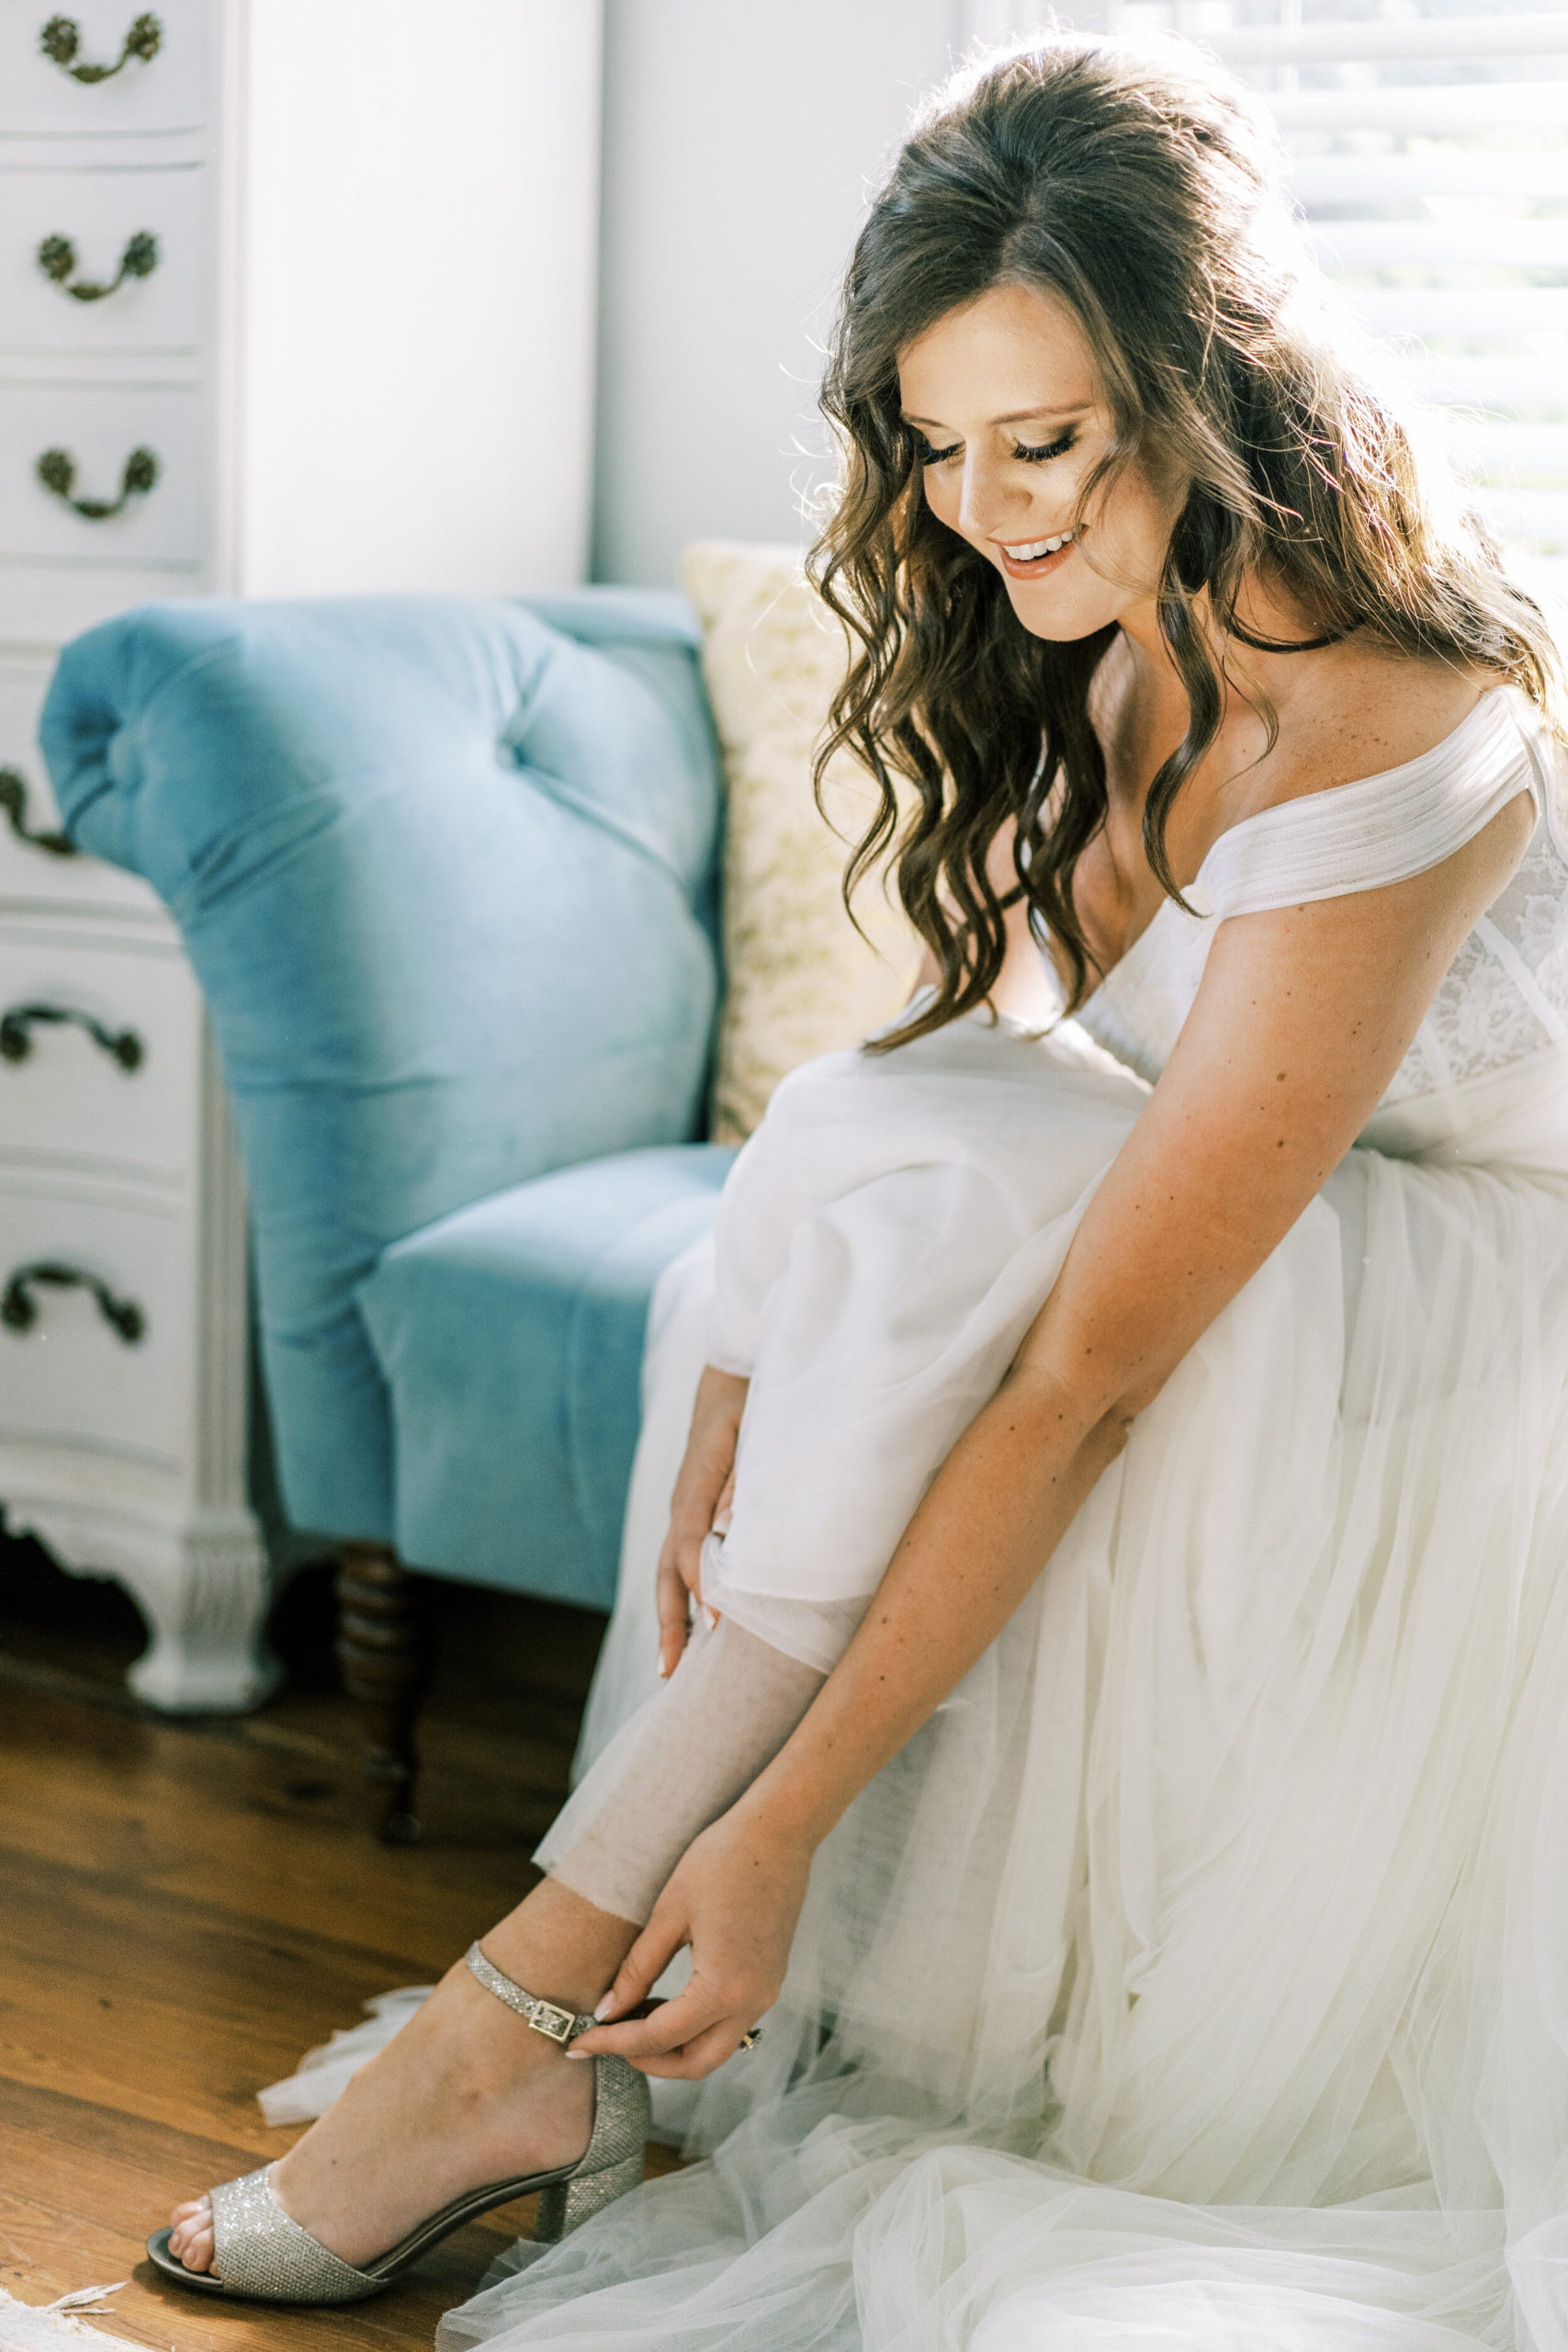 catherineannphotography-wedding-5420-cassietommy-60.jpg